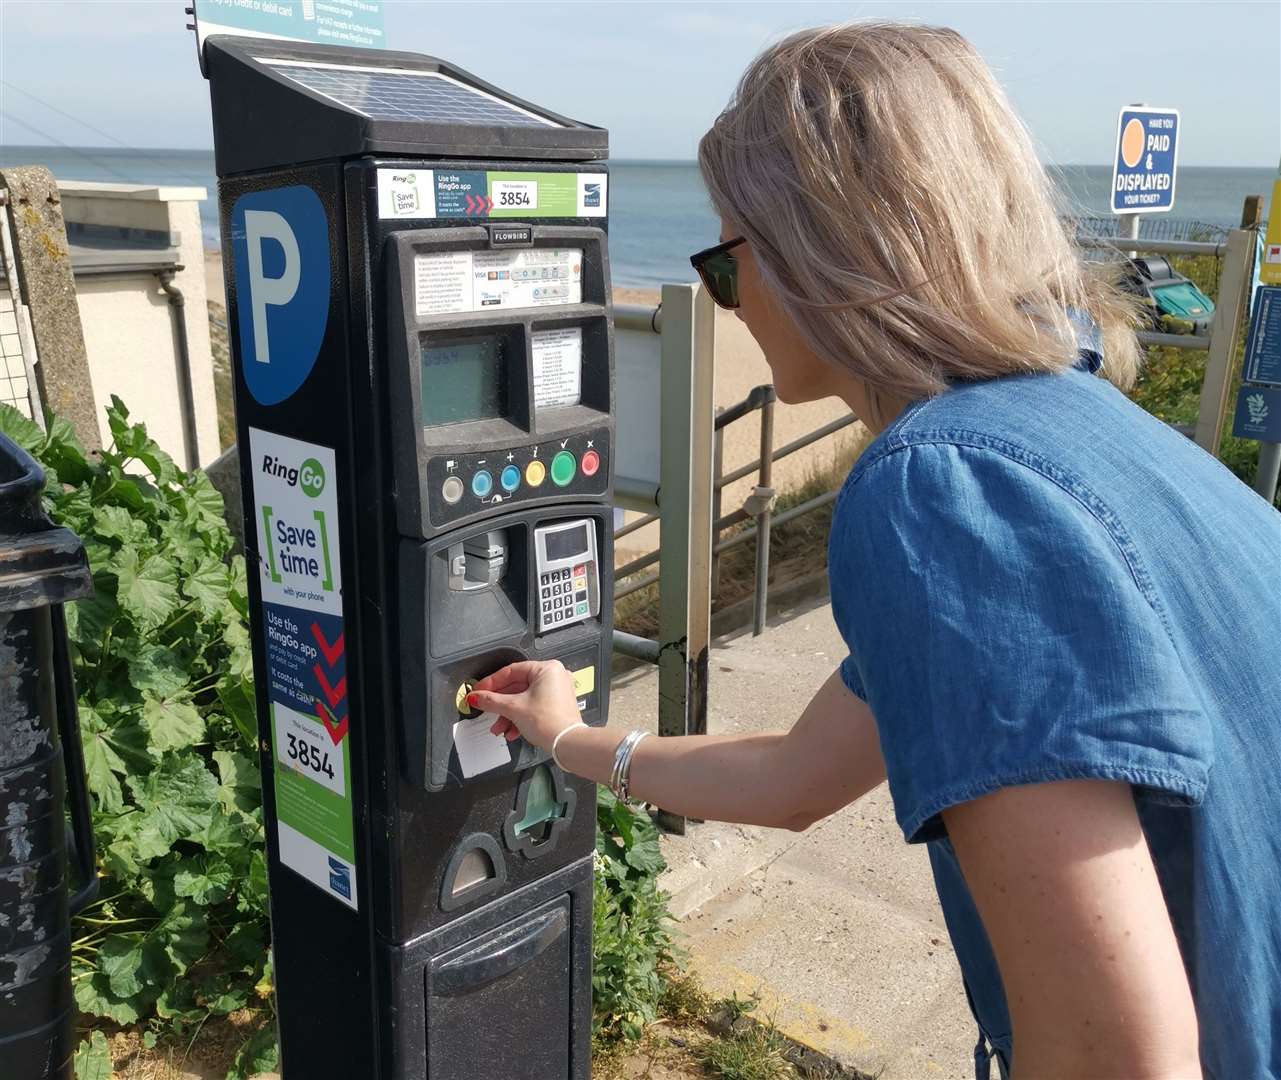 Paying for parking with coins at Joss Bay